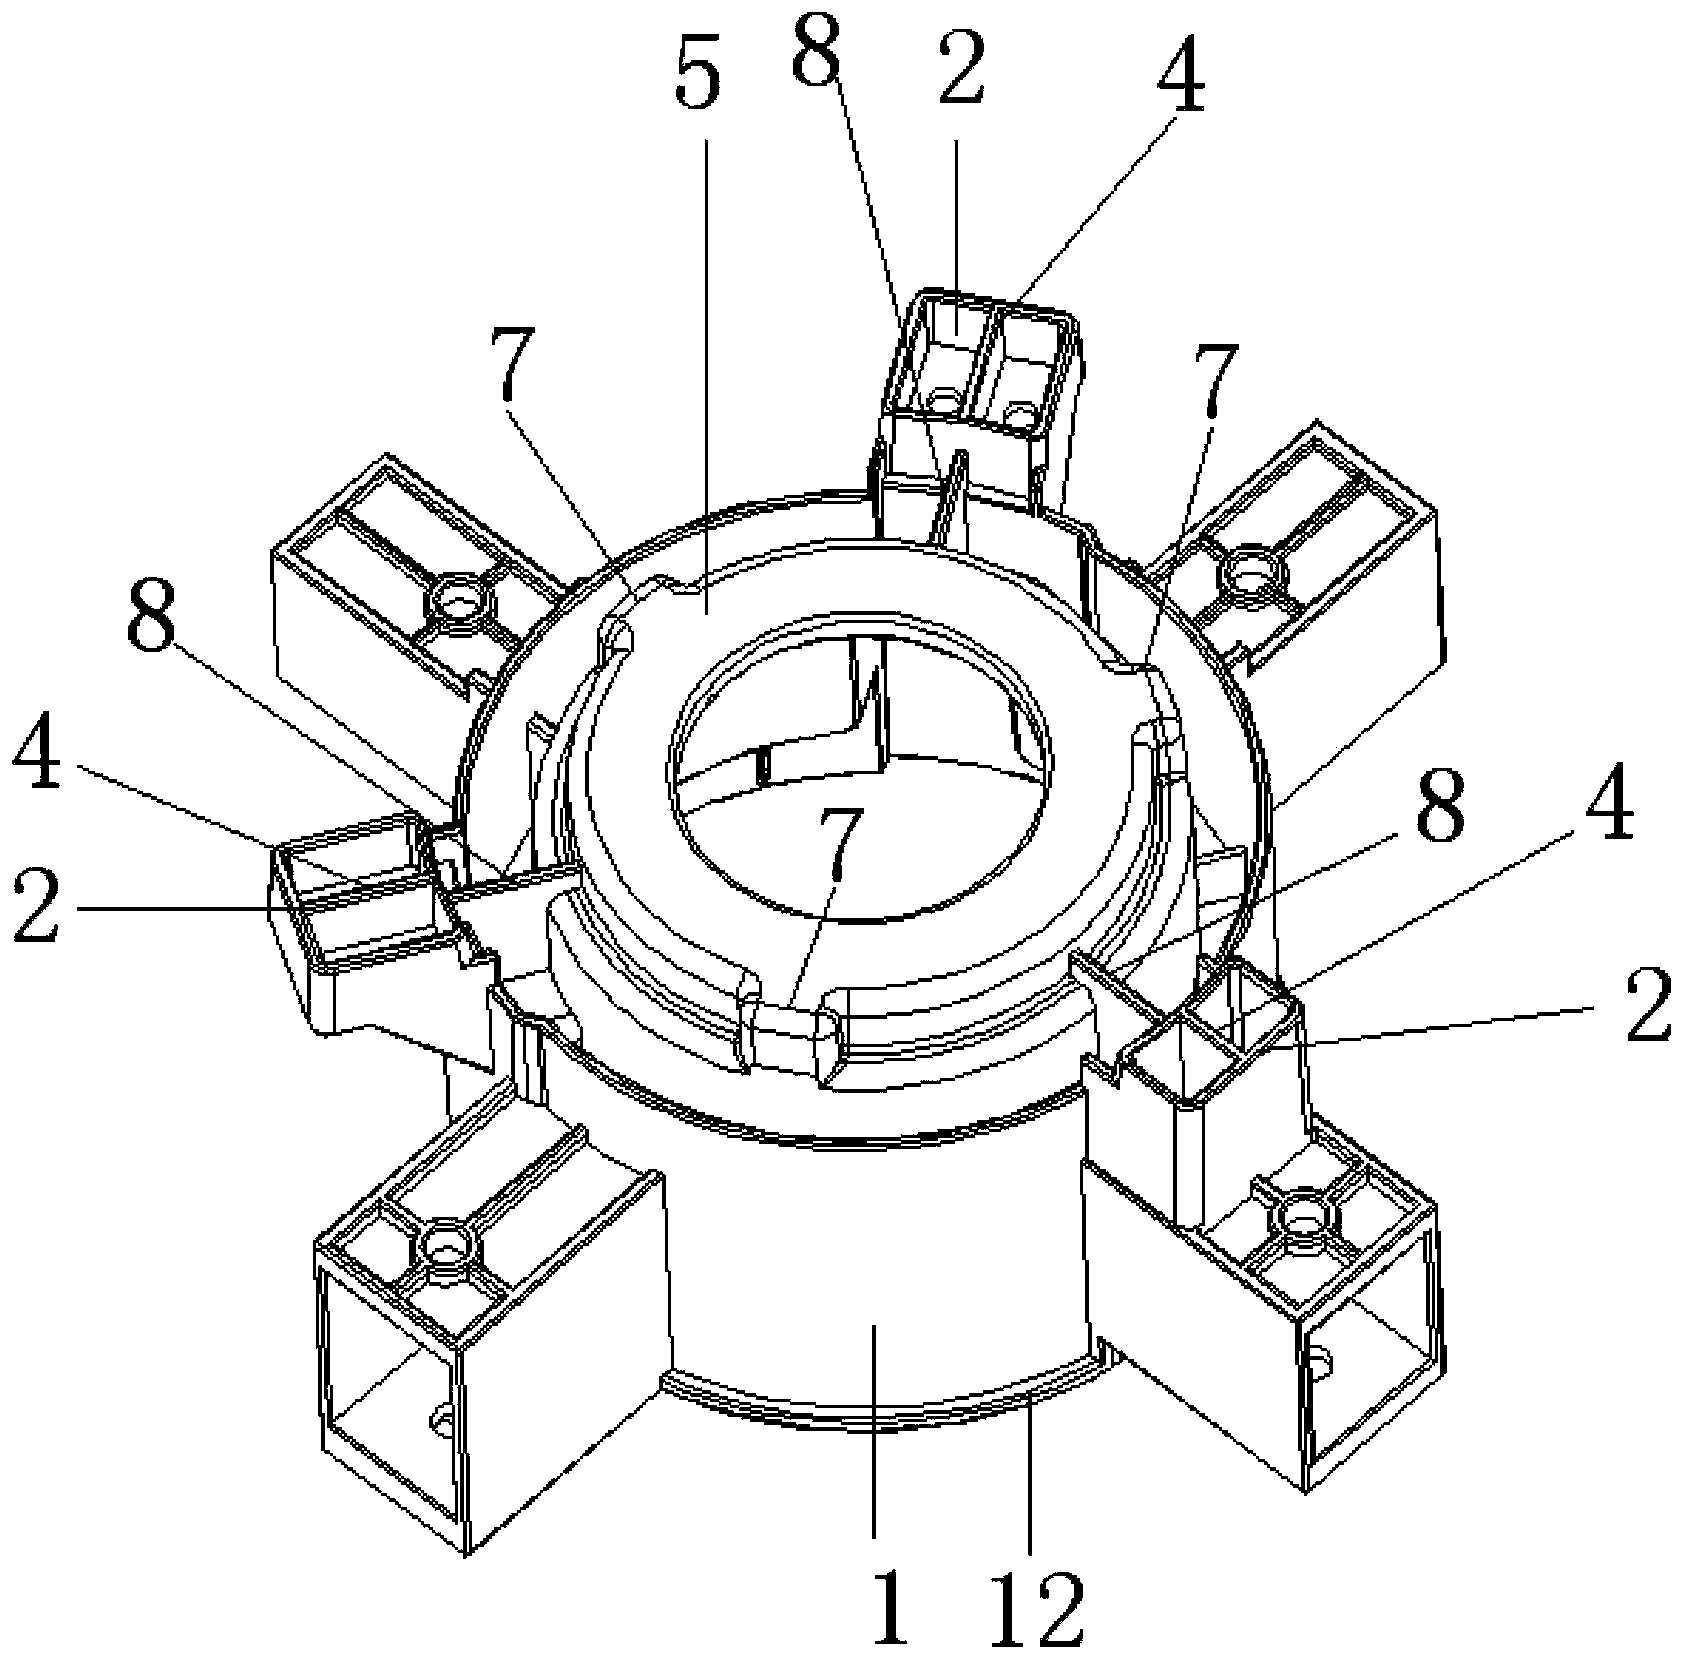 Packaging structure of air condition compressor